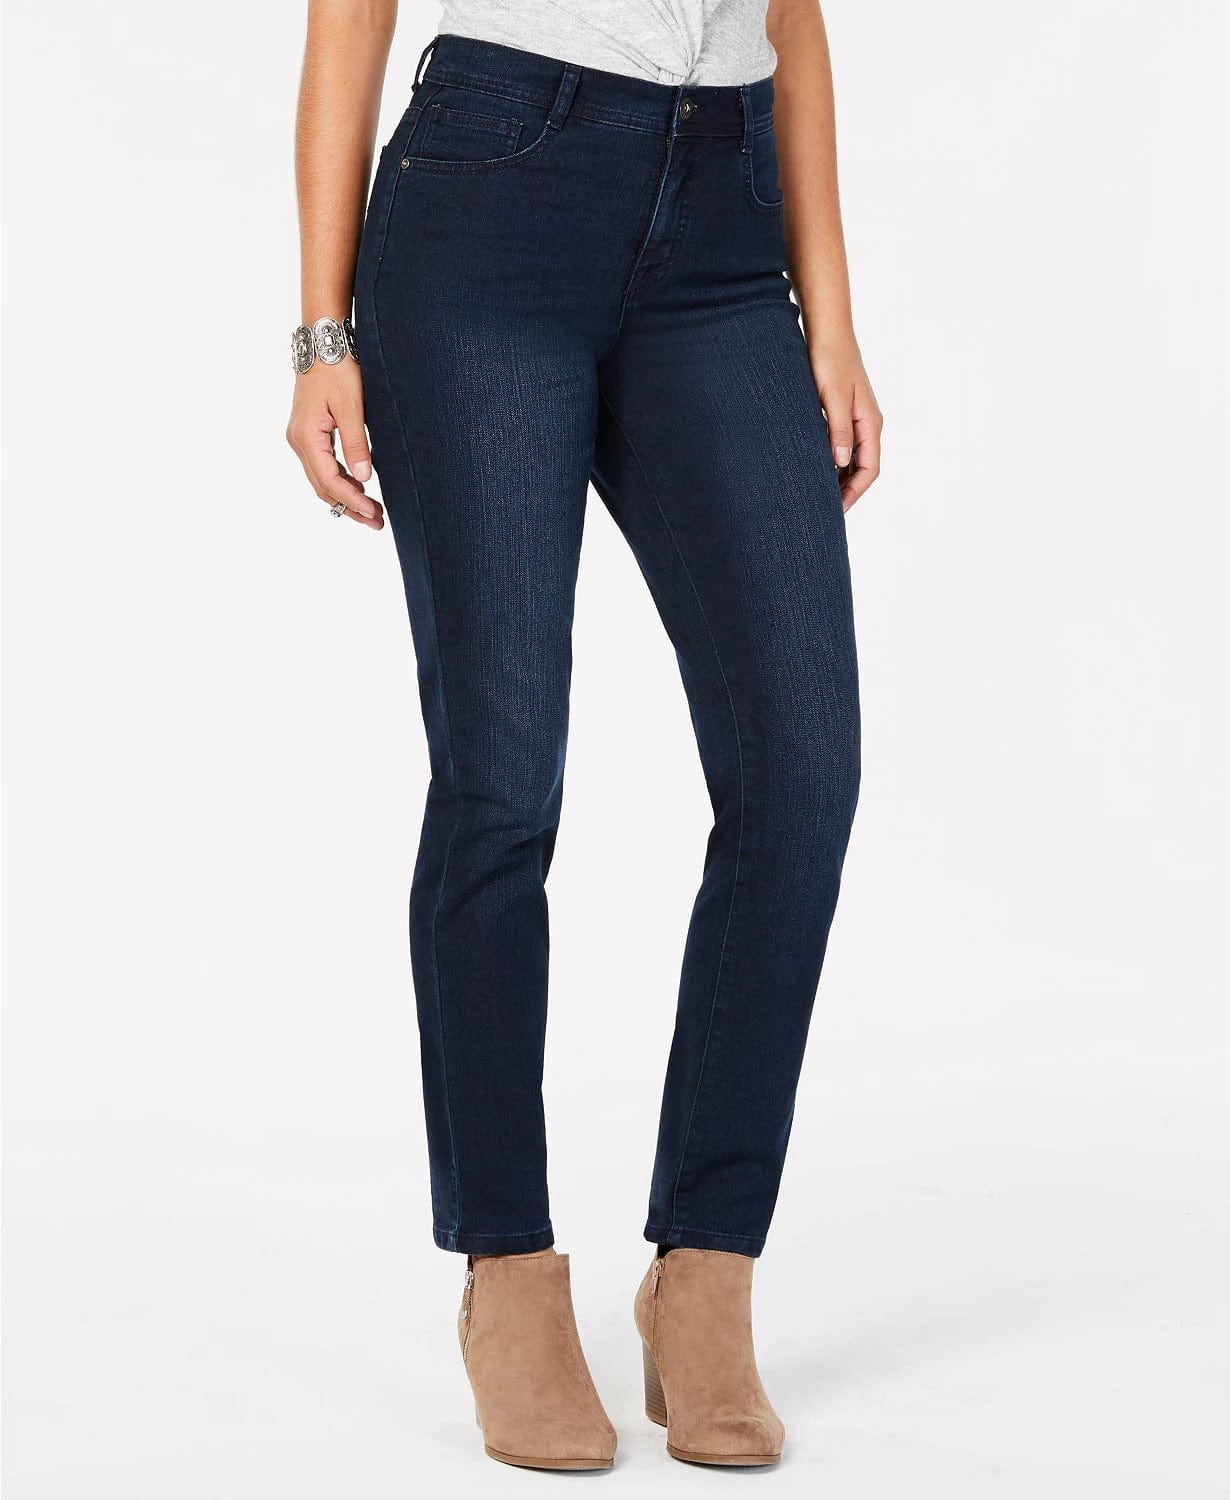 STYLE & CO. Womens Bottoms S / Navy STYLE & CO. - Slim-Leg Jeans